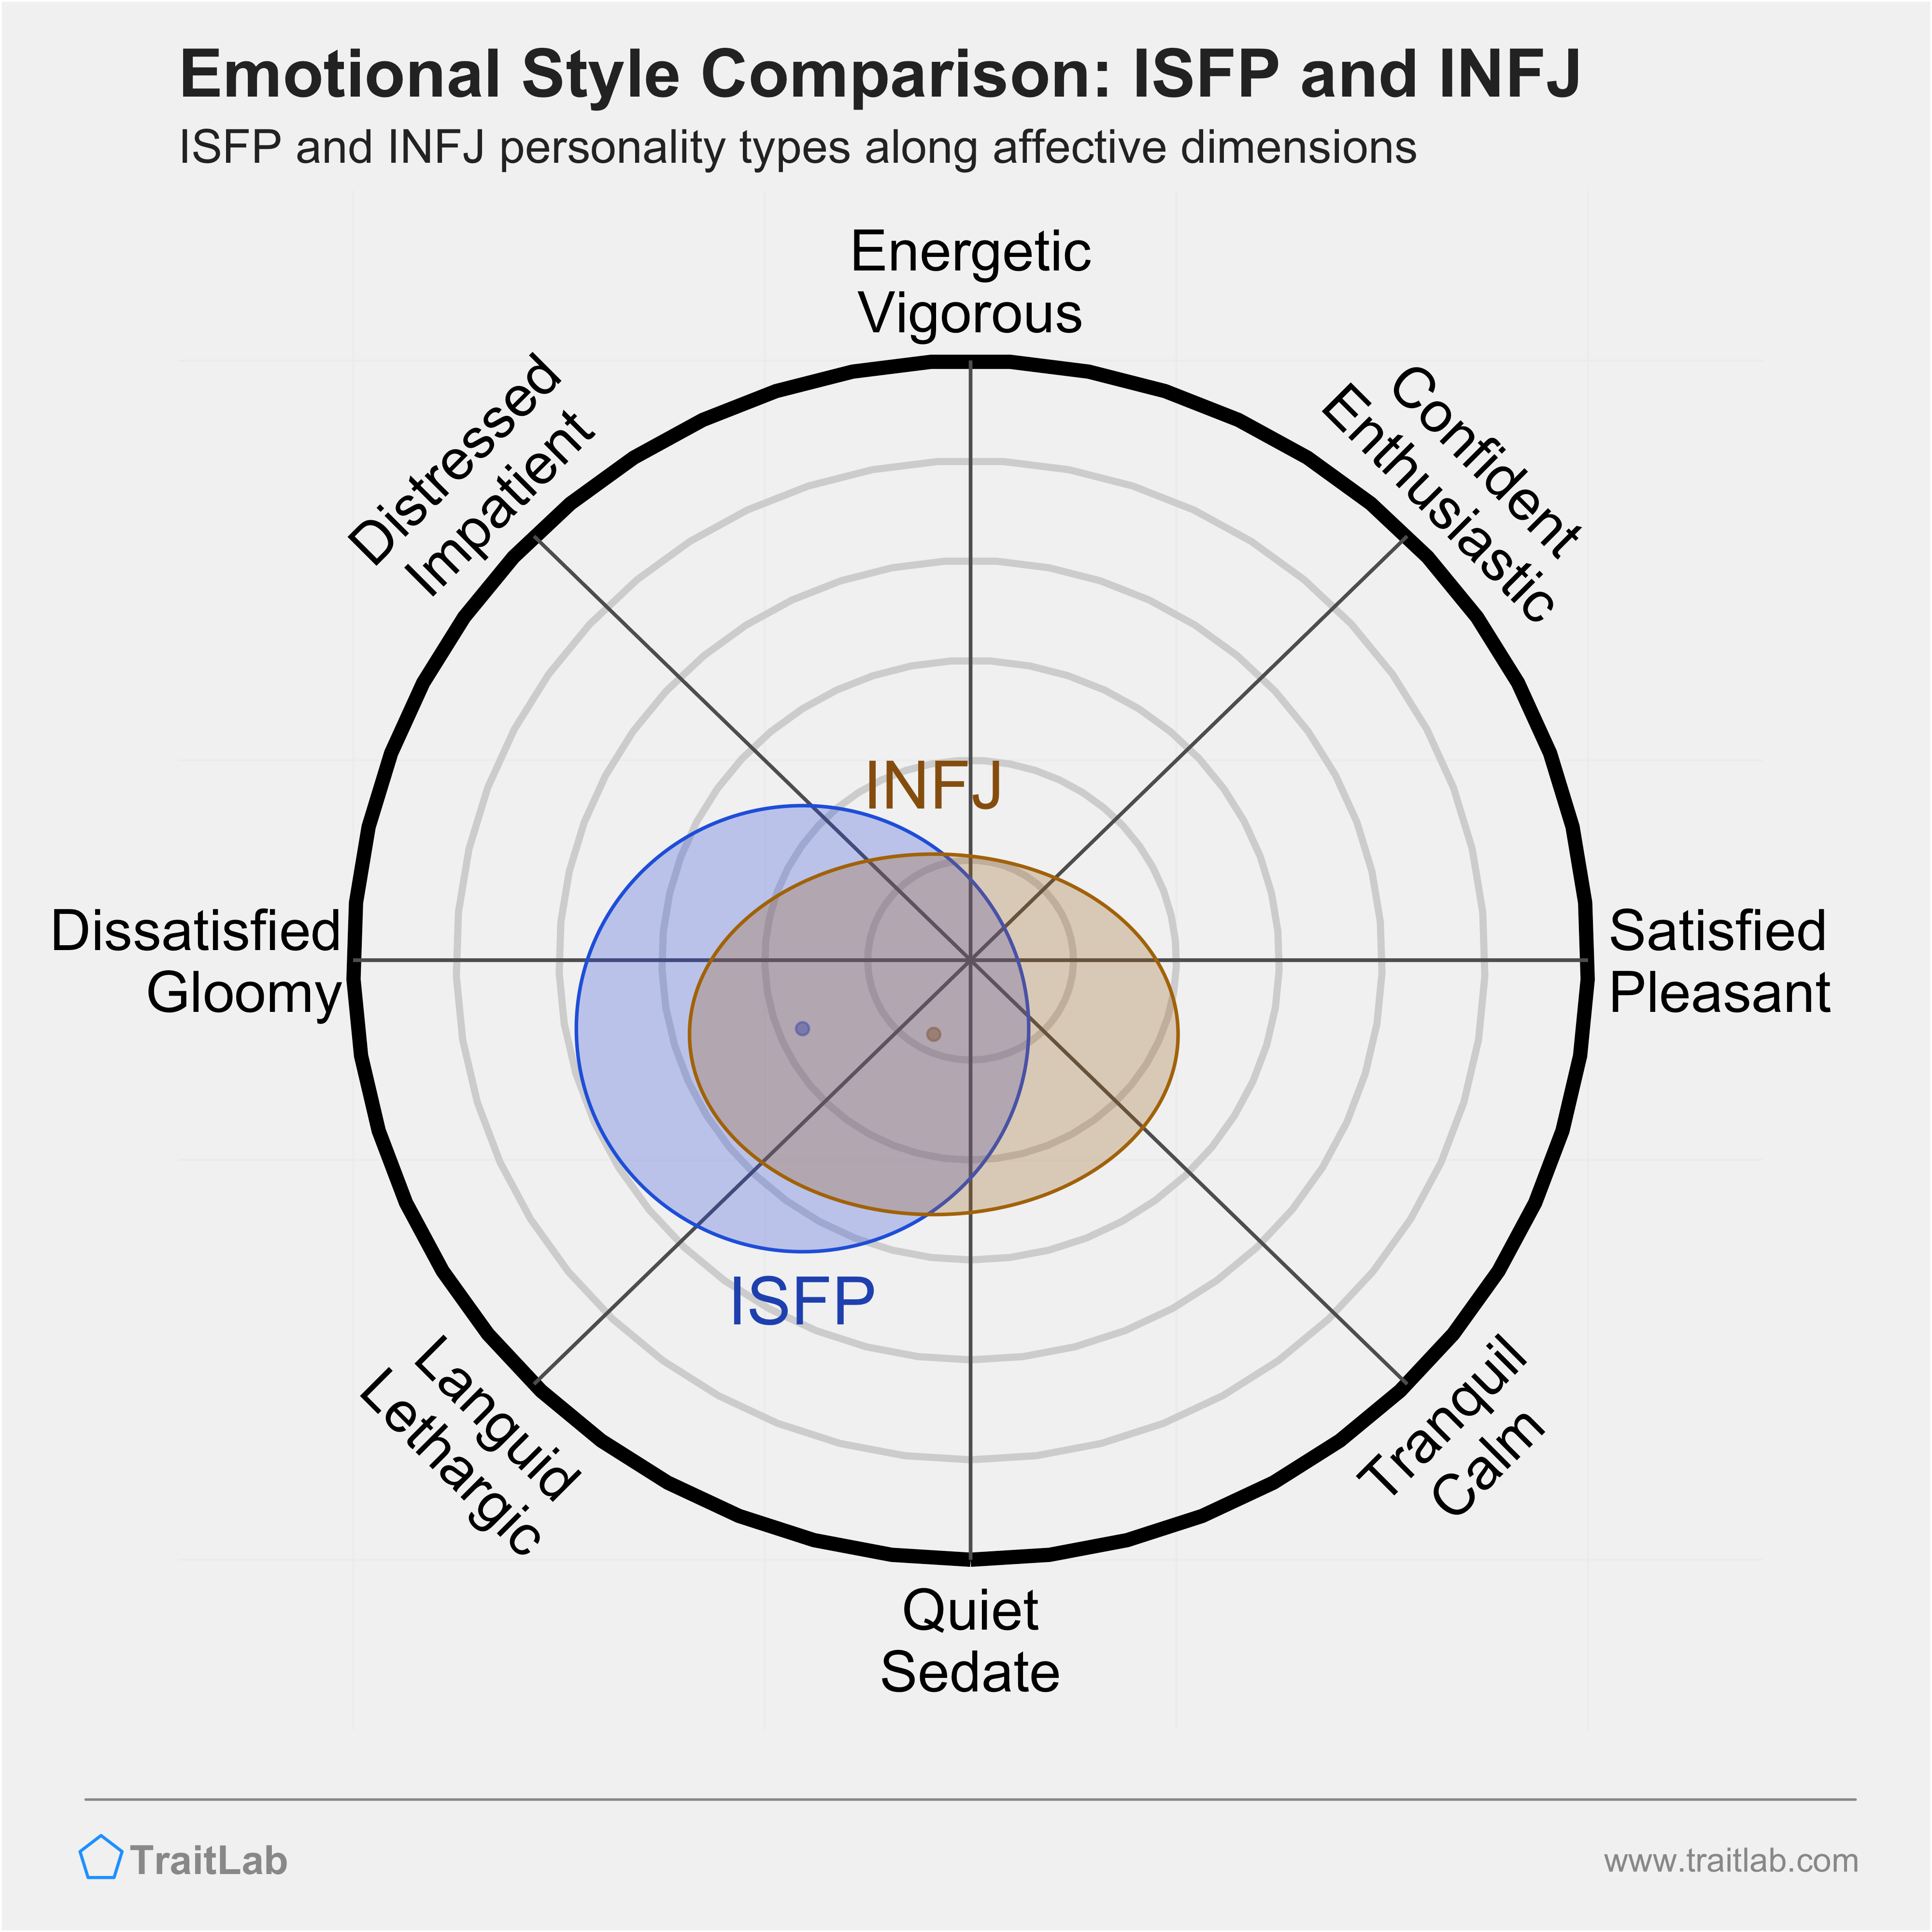 ISFP and INFJ comparison across emotional (affective) dimensions